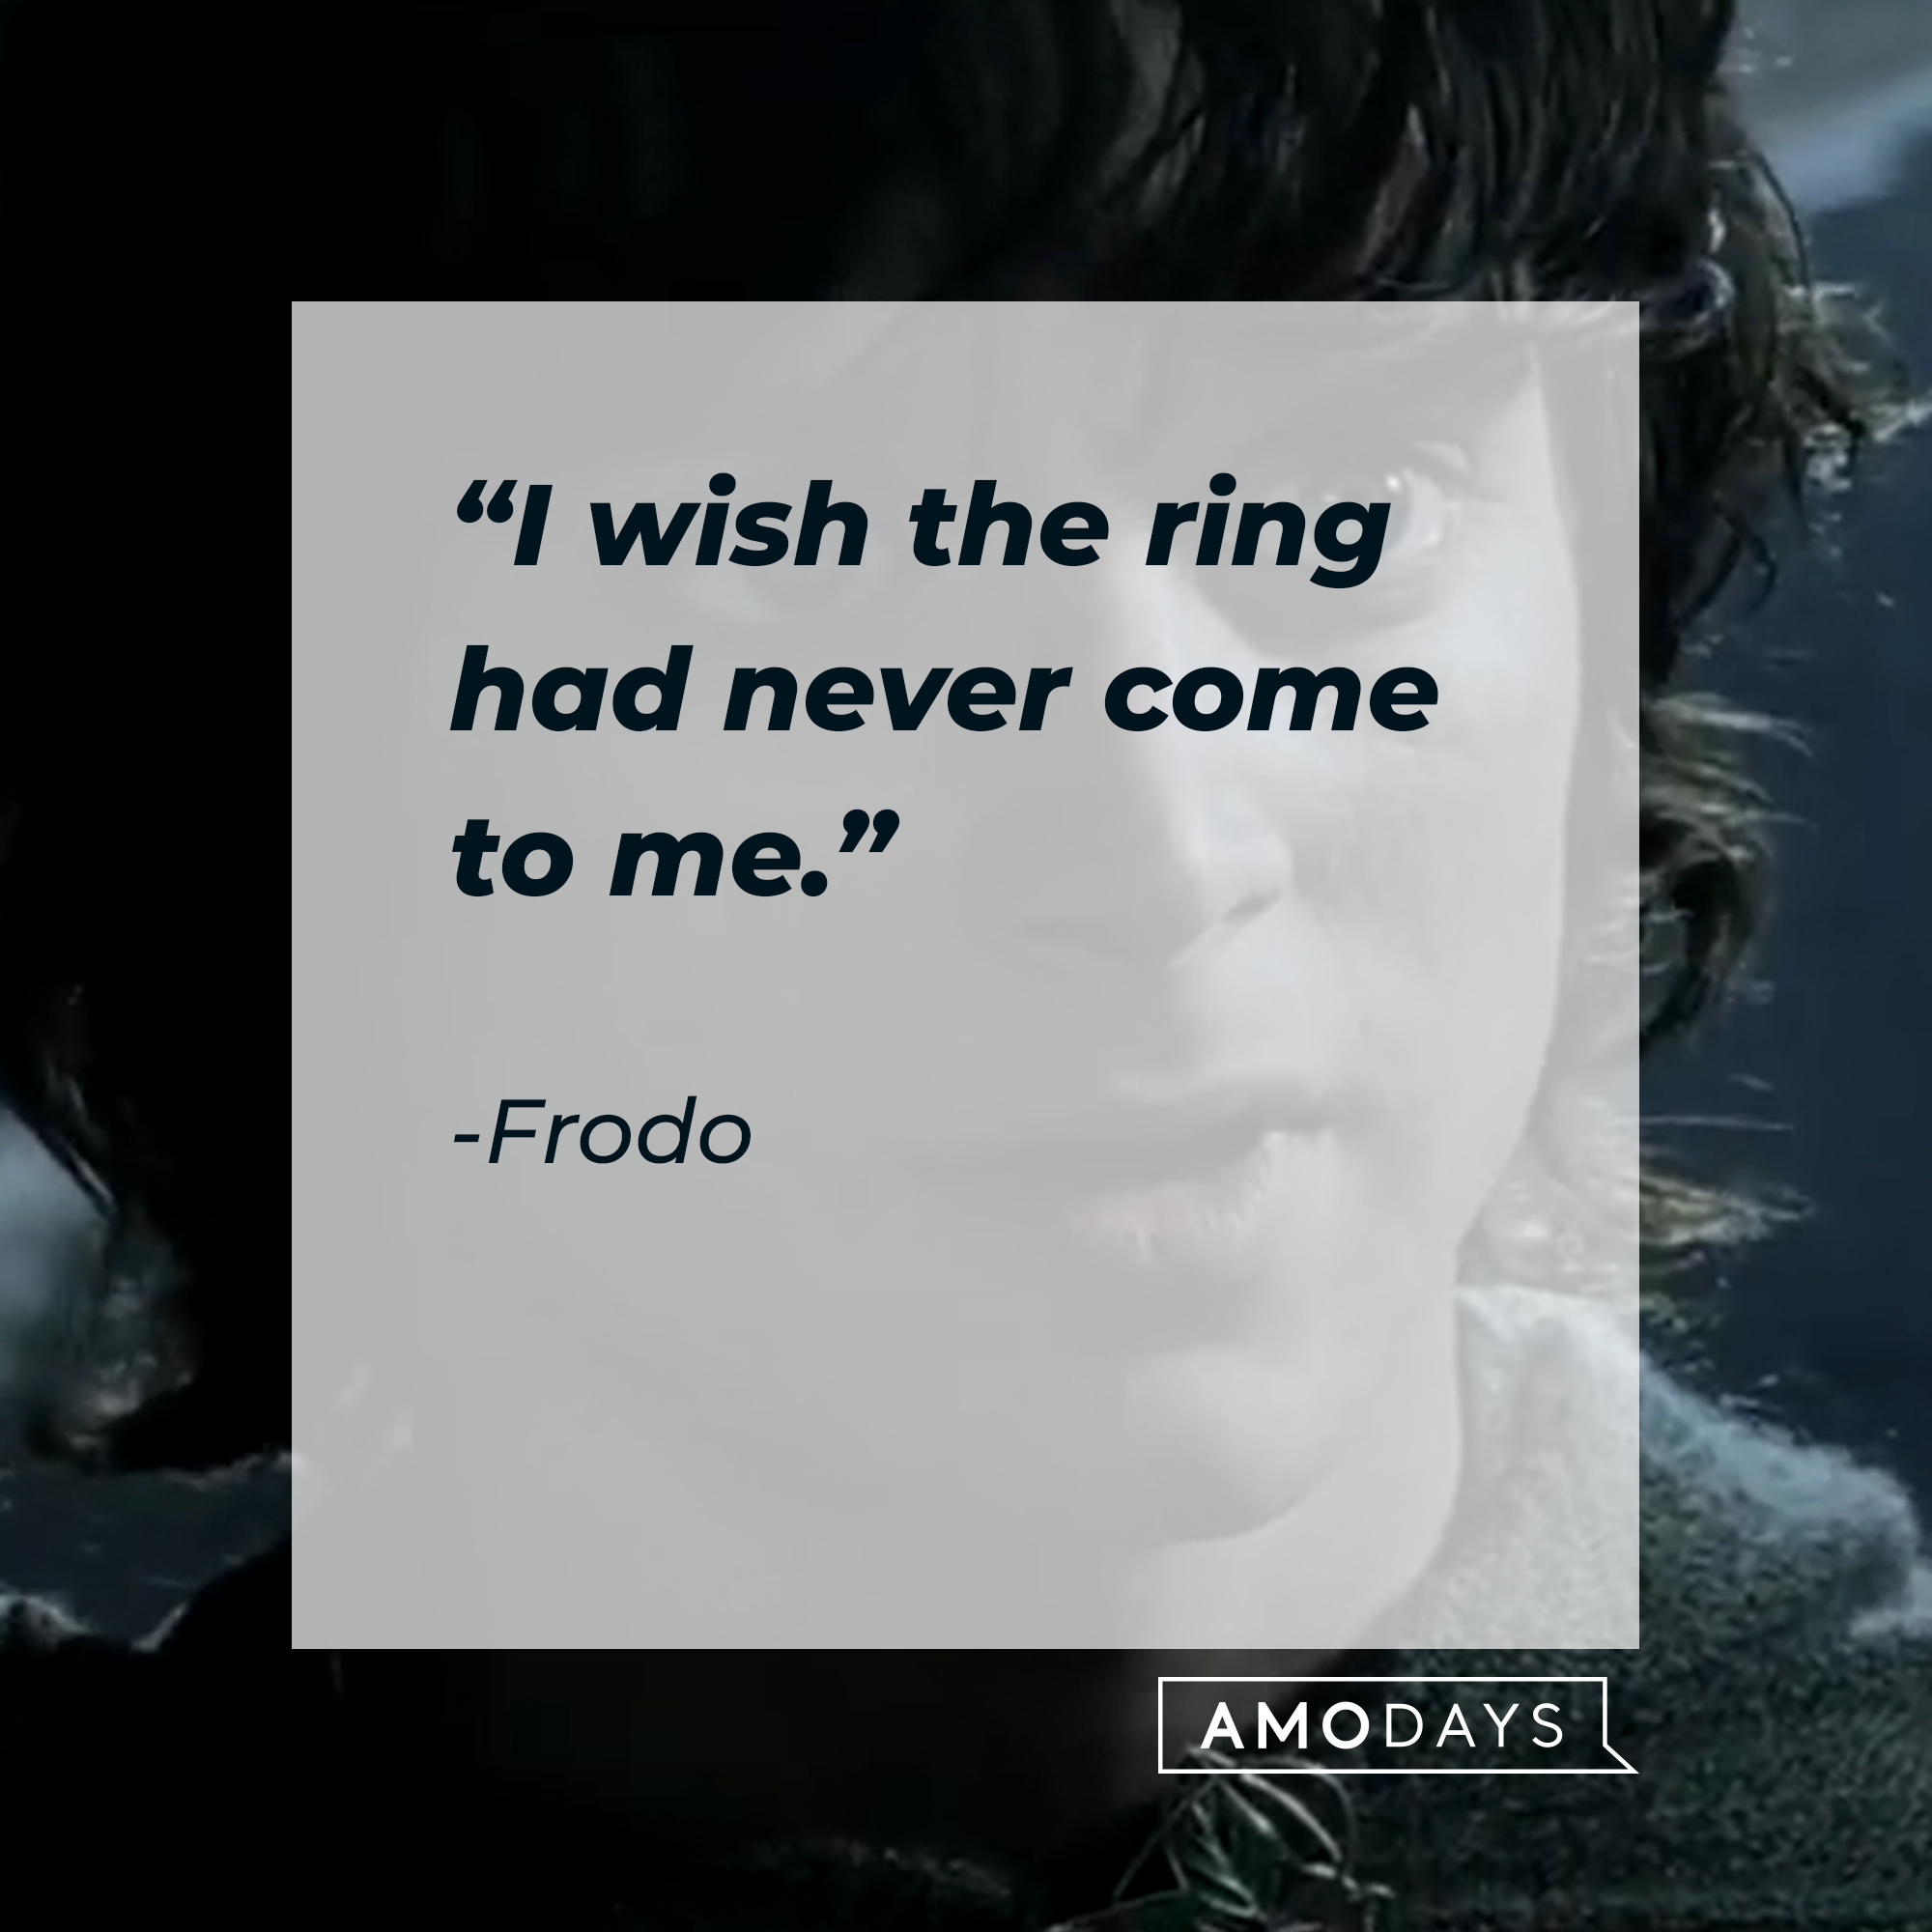 A photo of Frodo Baggins with the quote, "I wish the ring had never come to me." | Source: Facebook/lordoftheringstrilogy